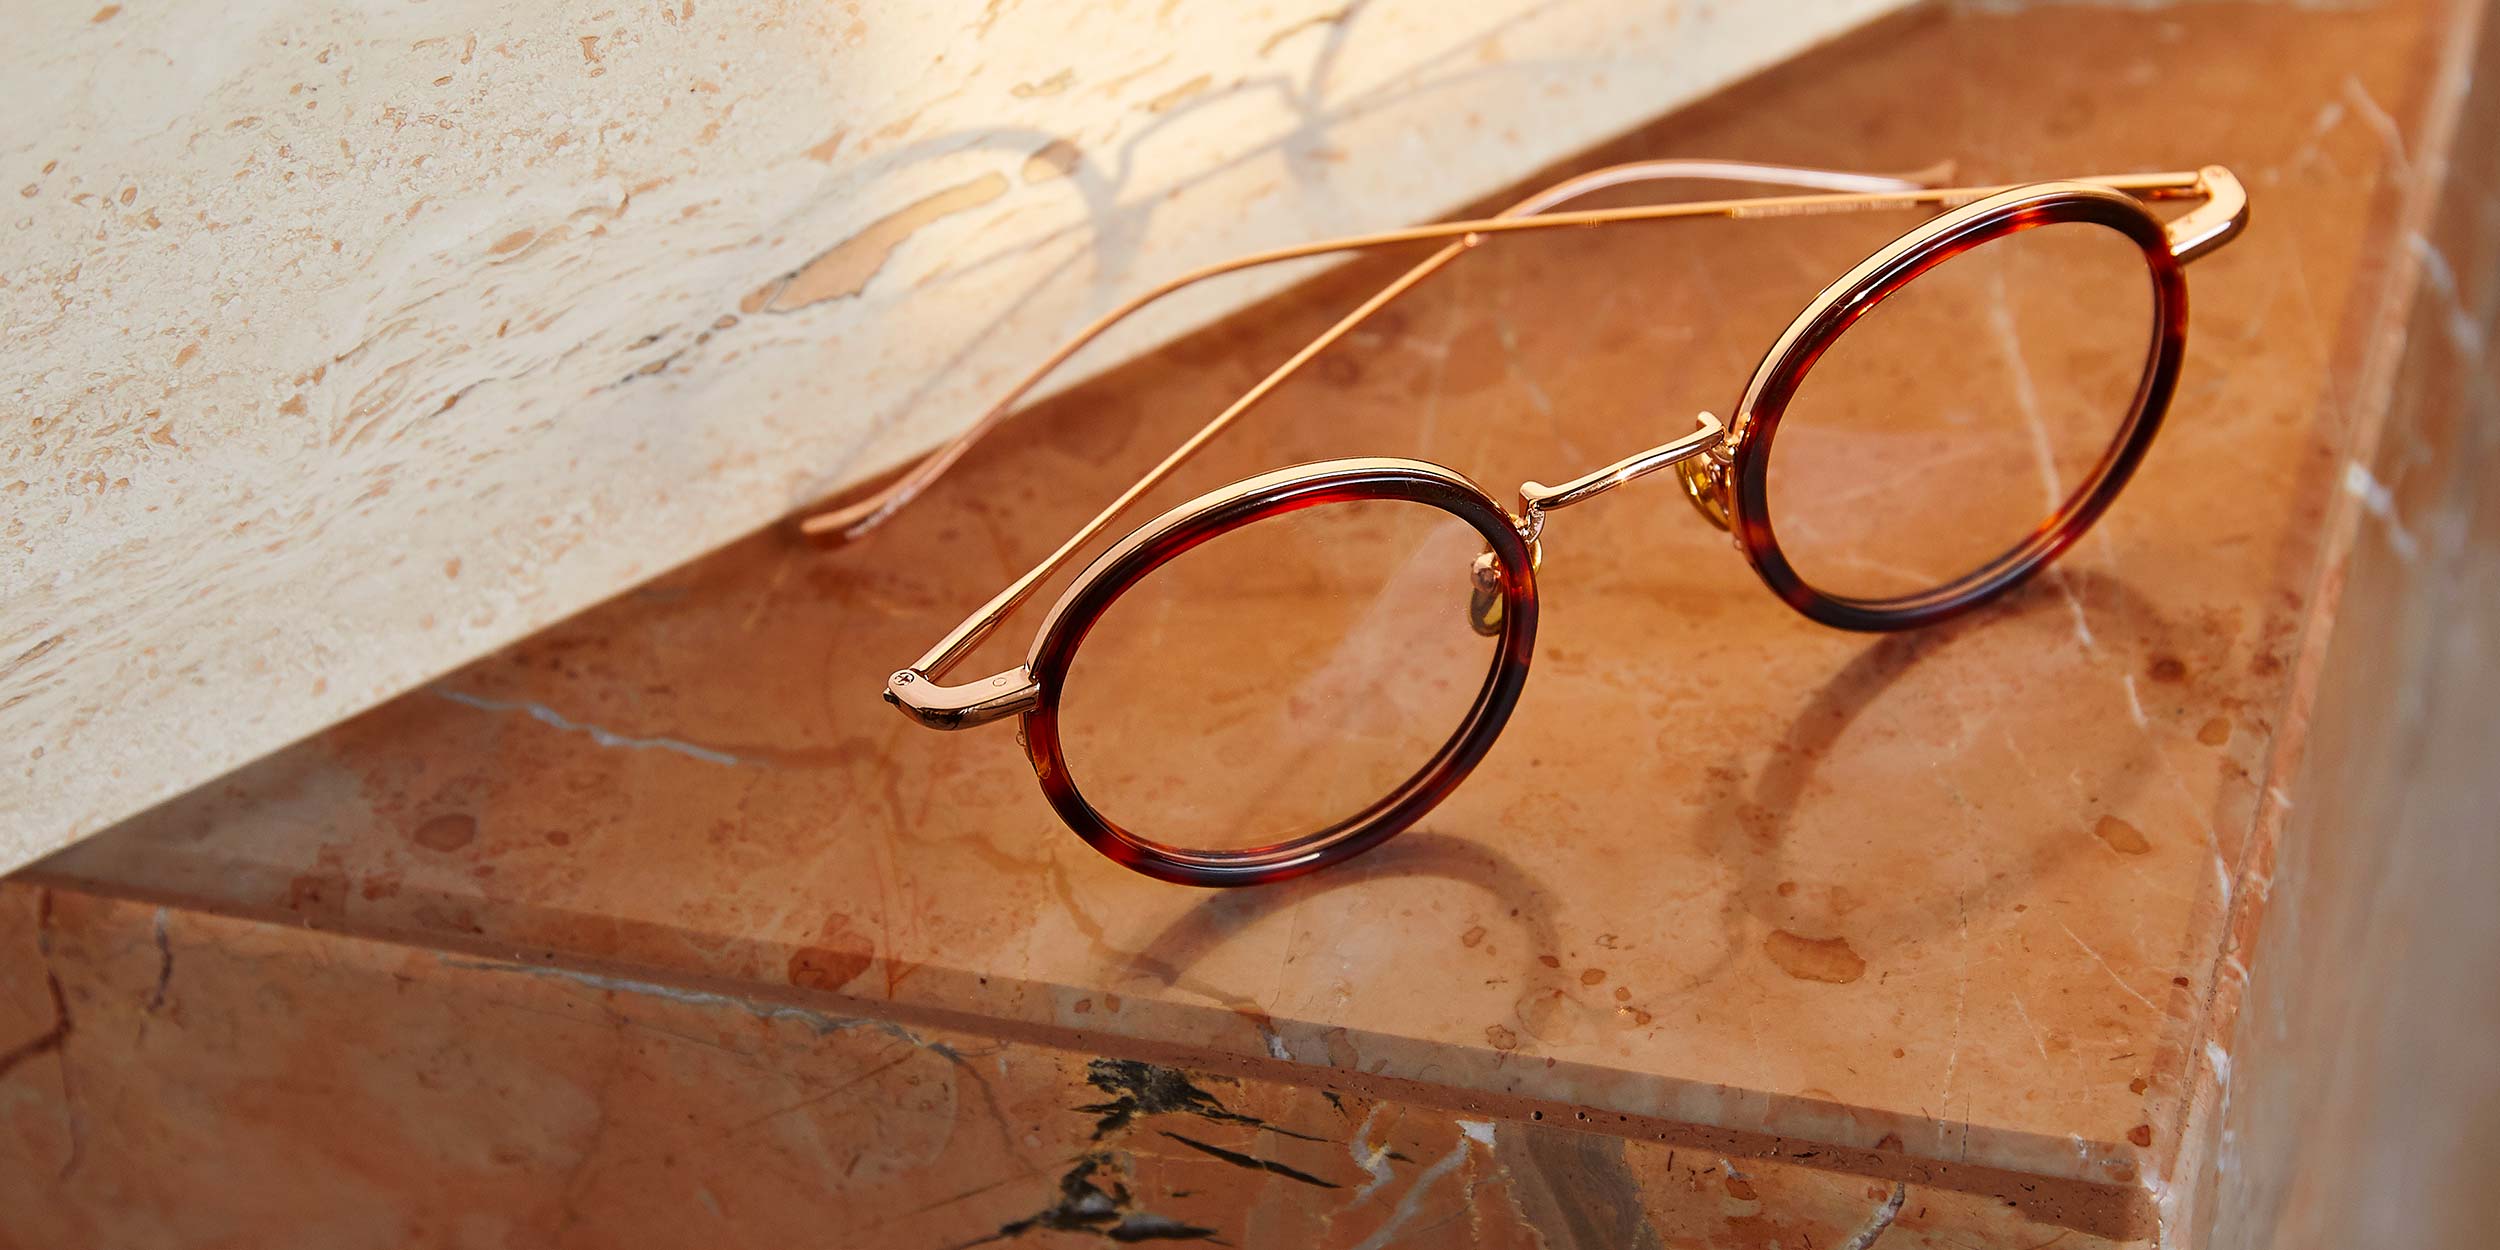 Photo Details of Nicolas Cobalt & Rose Gold Reading Glasses in a room